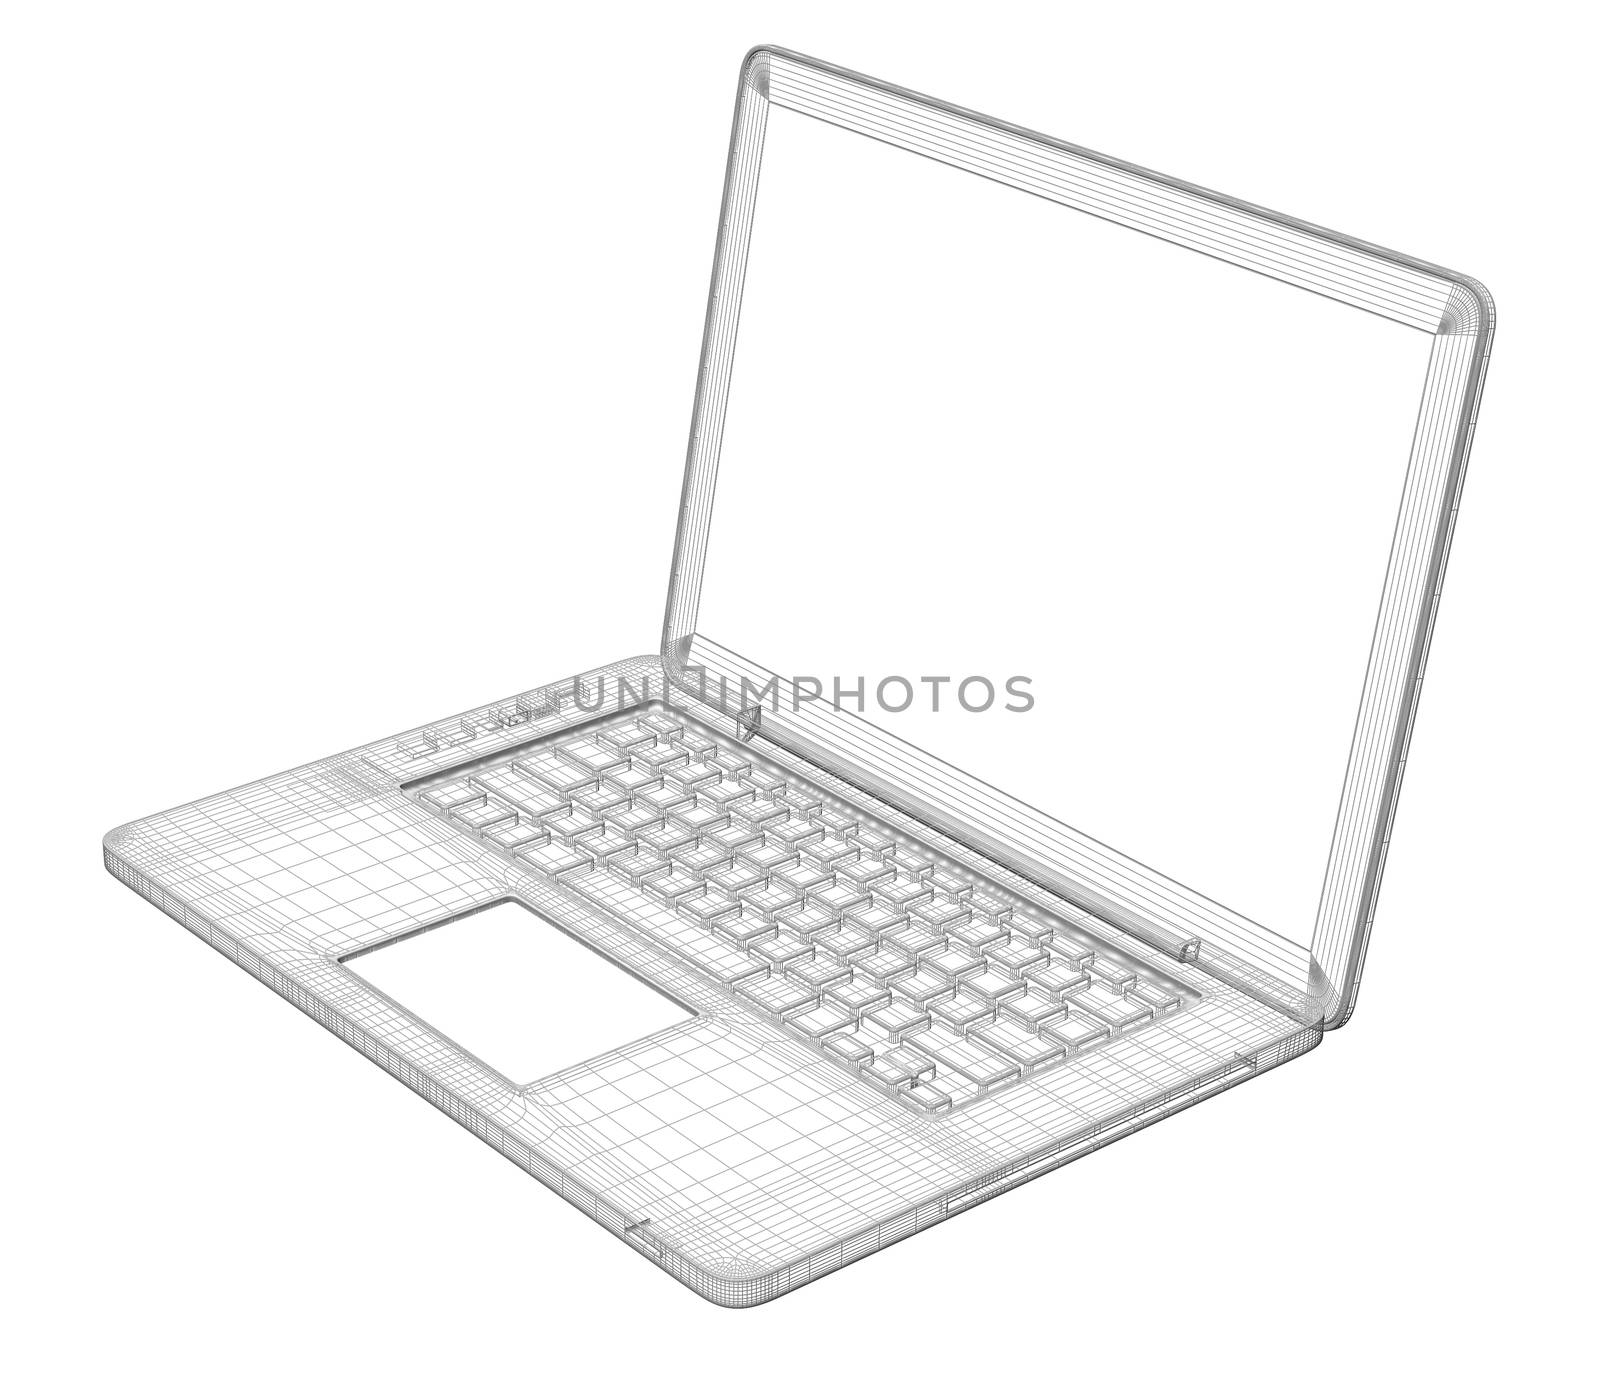 Laptop. Wire frame by cherezoff